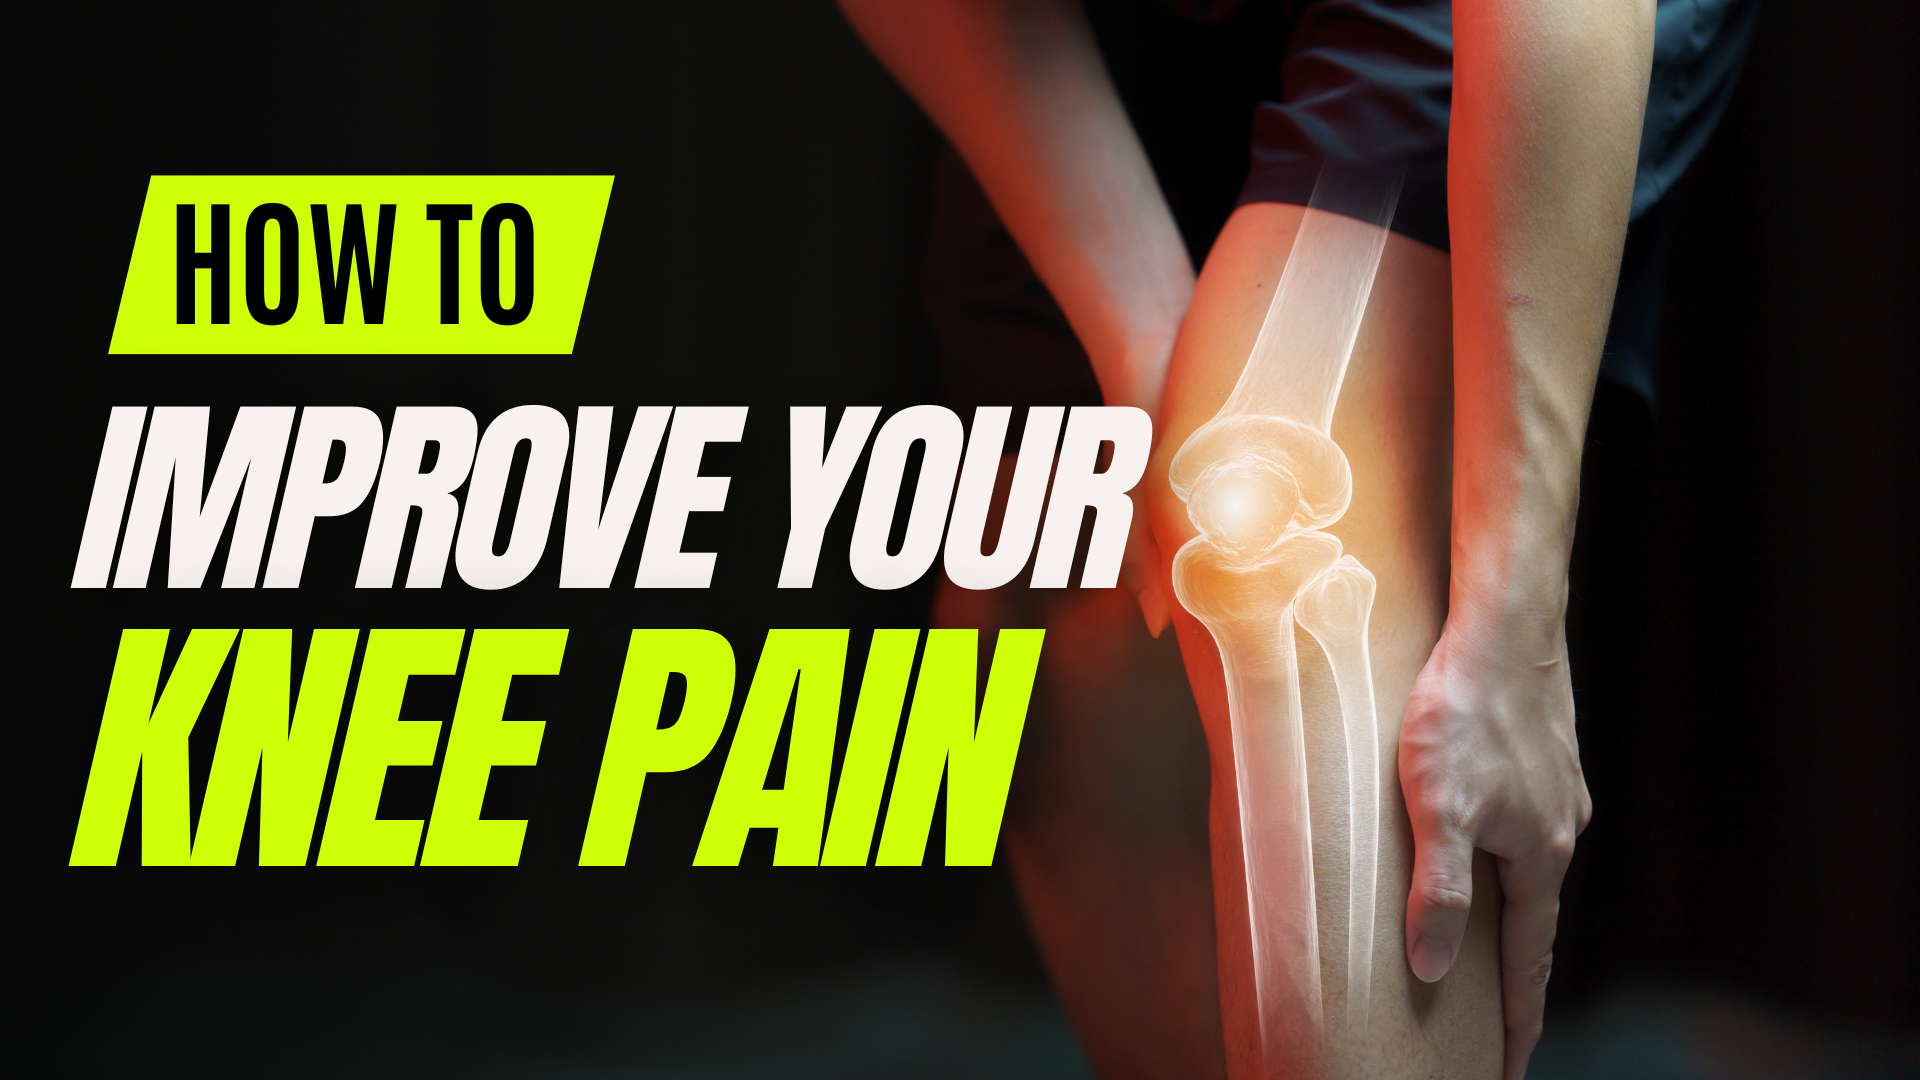 How to Improve Your Knee Pain | Knee Rotation